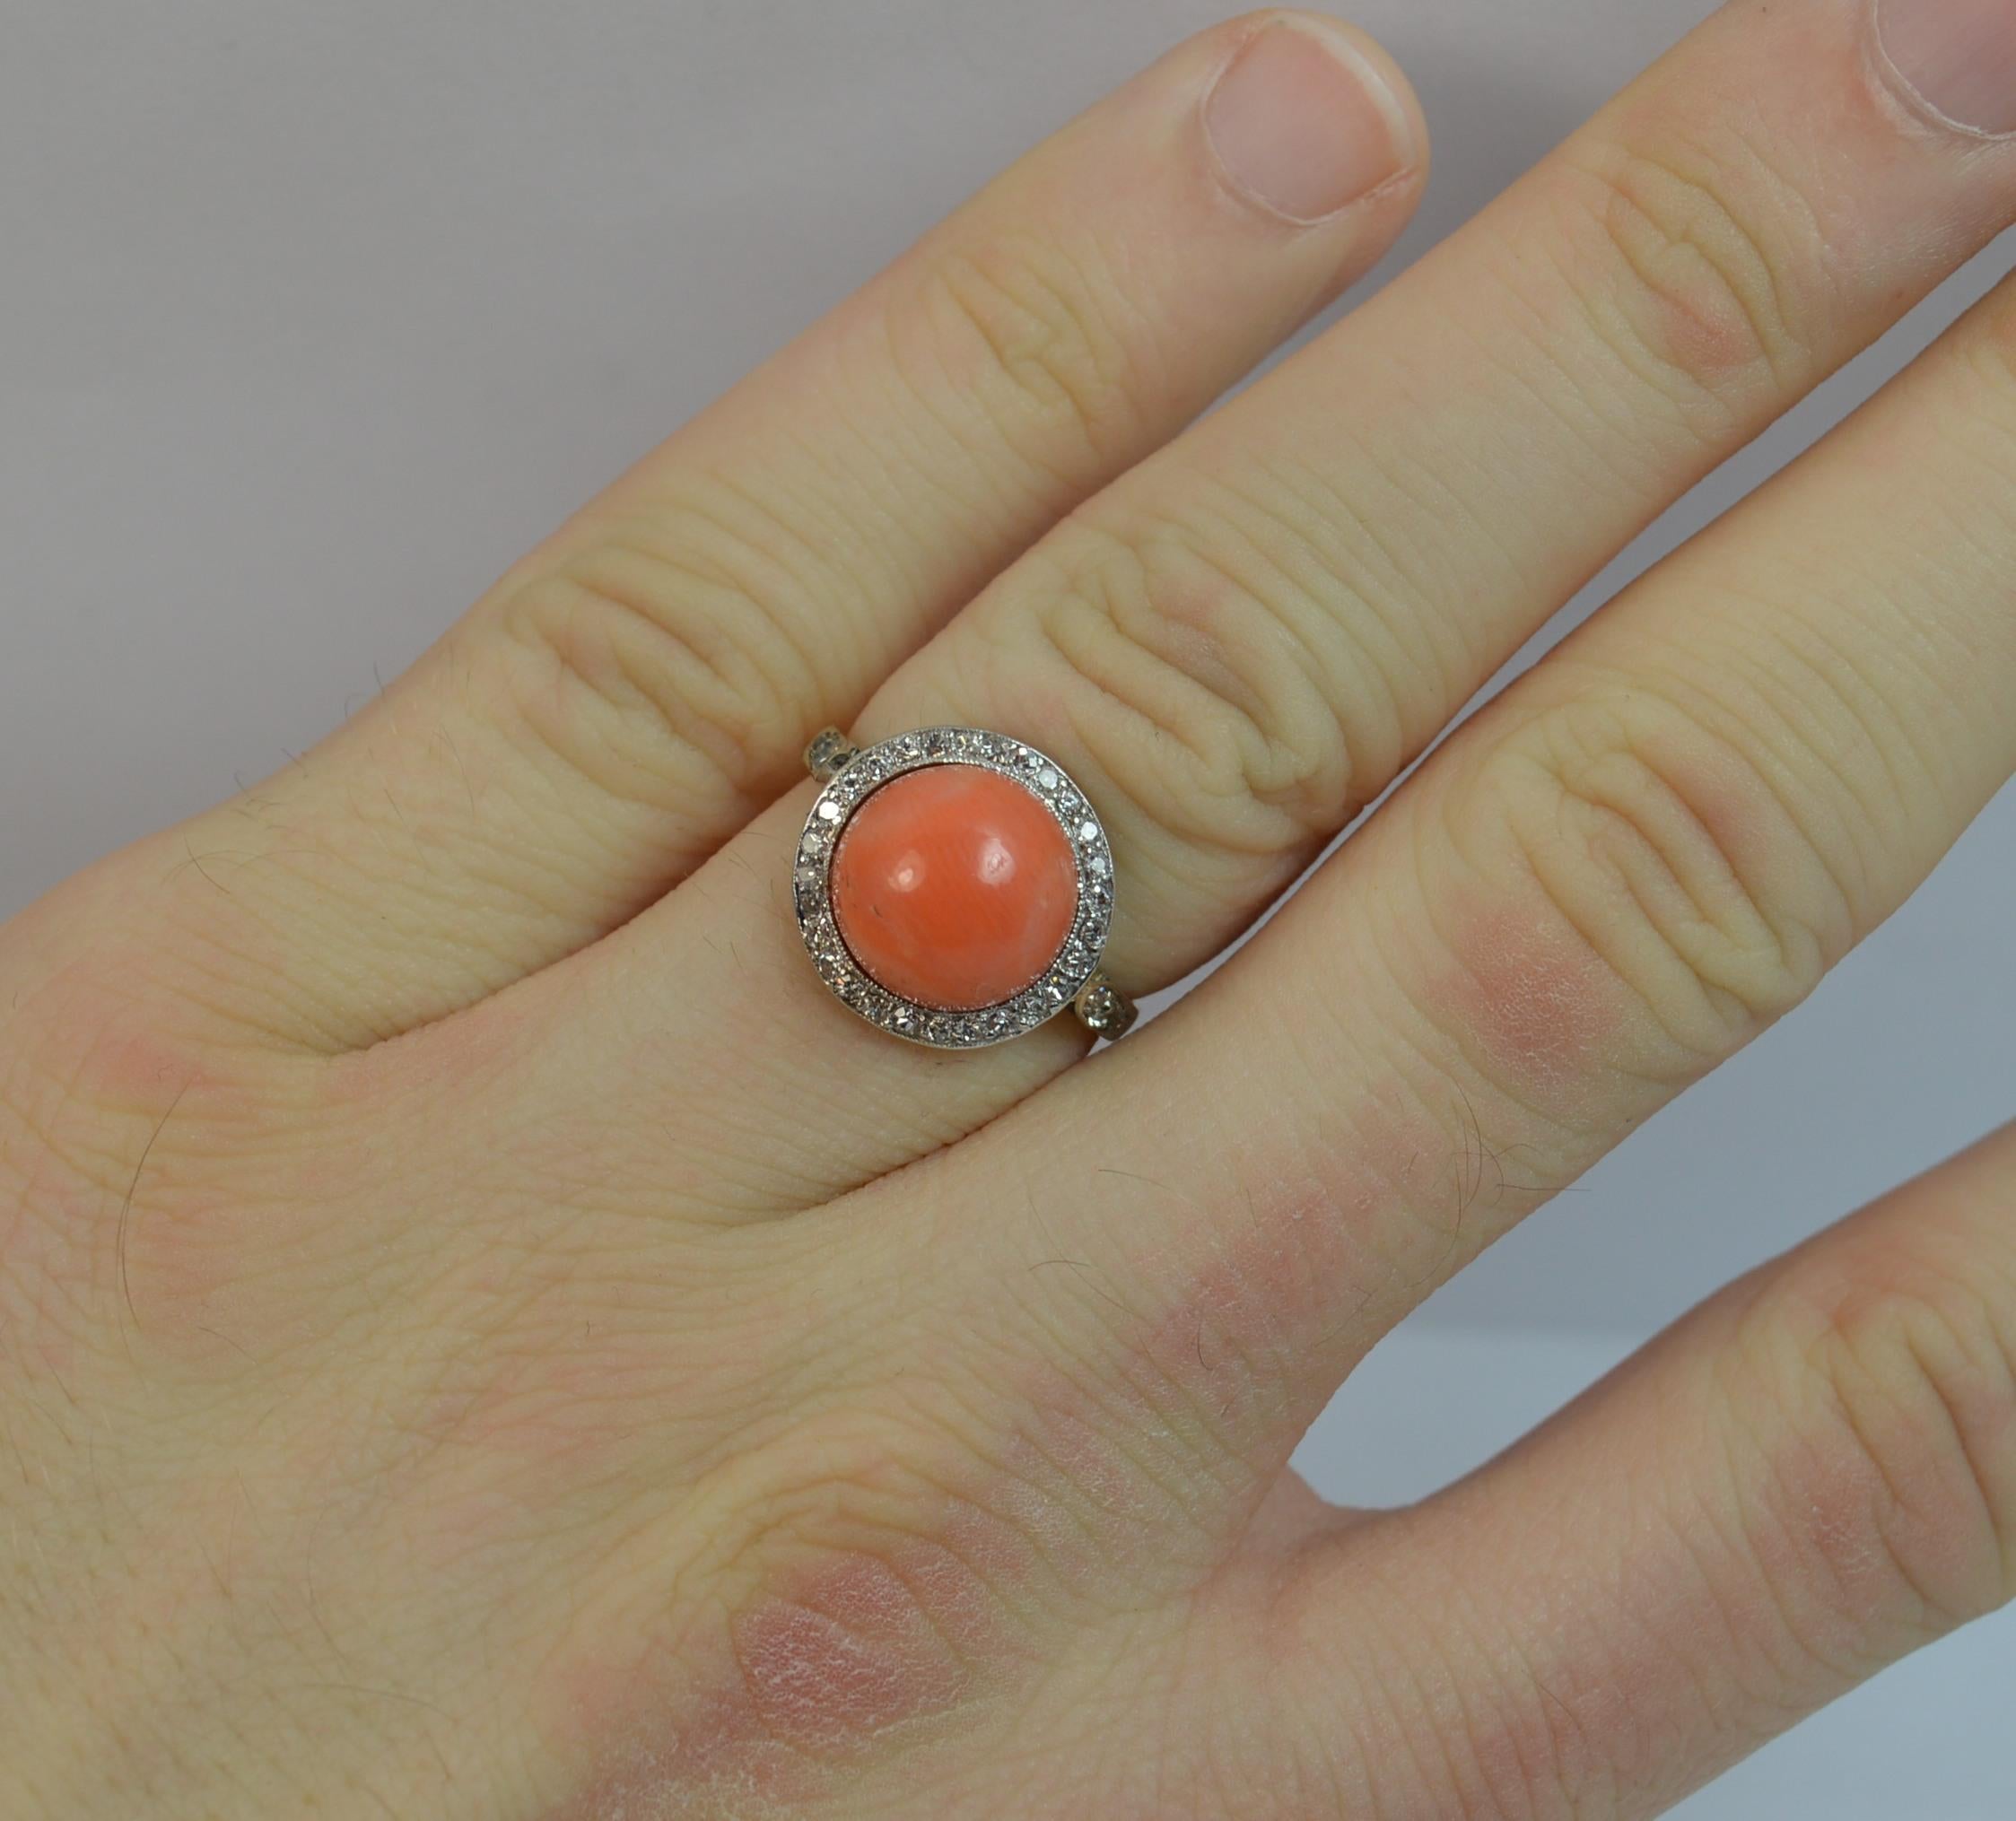 A beautiful late Victorian or Edwardian period ring.
SIZE ; L UK, 5 3/4 US
Solid 18 carat yellow gold shank with platinum setting for the diamonds.

Set with a superb single piece of coral to the centre, 10mm diameter, protruding 8mm.

Surround the